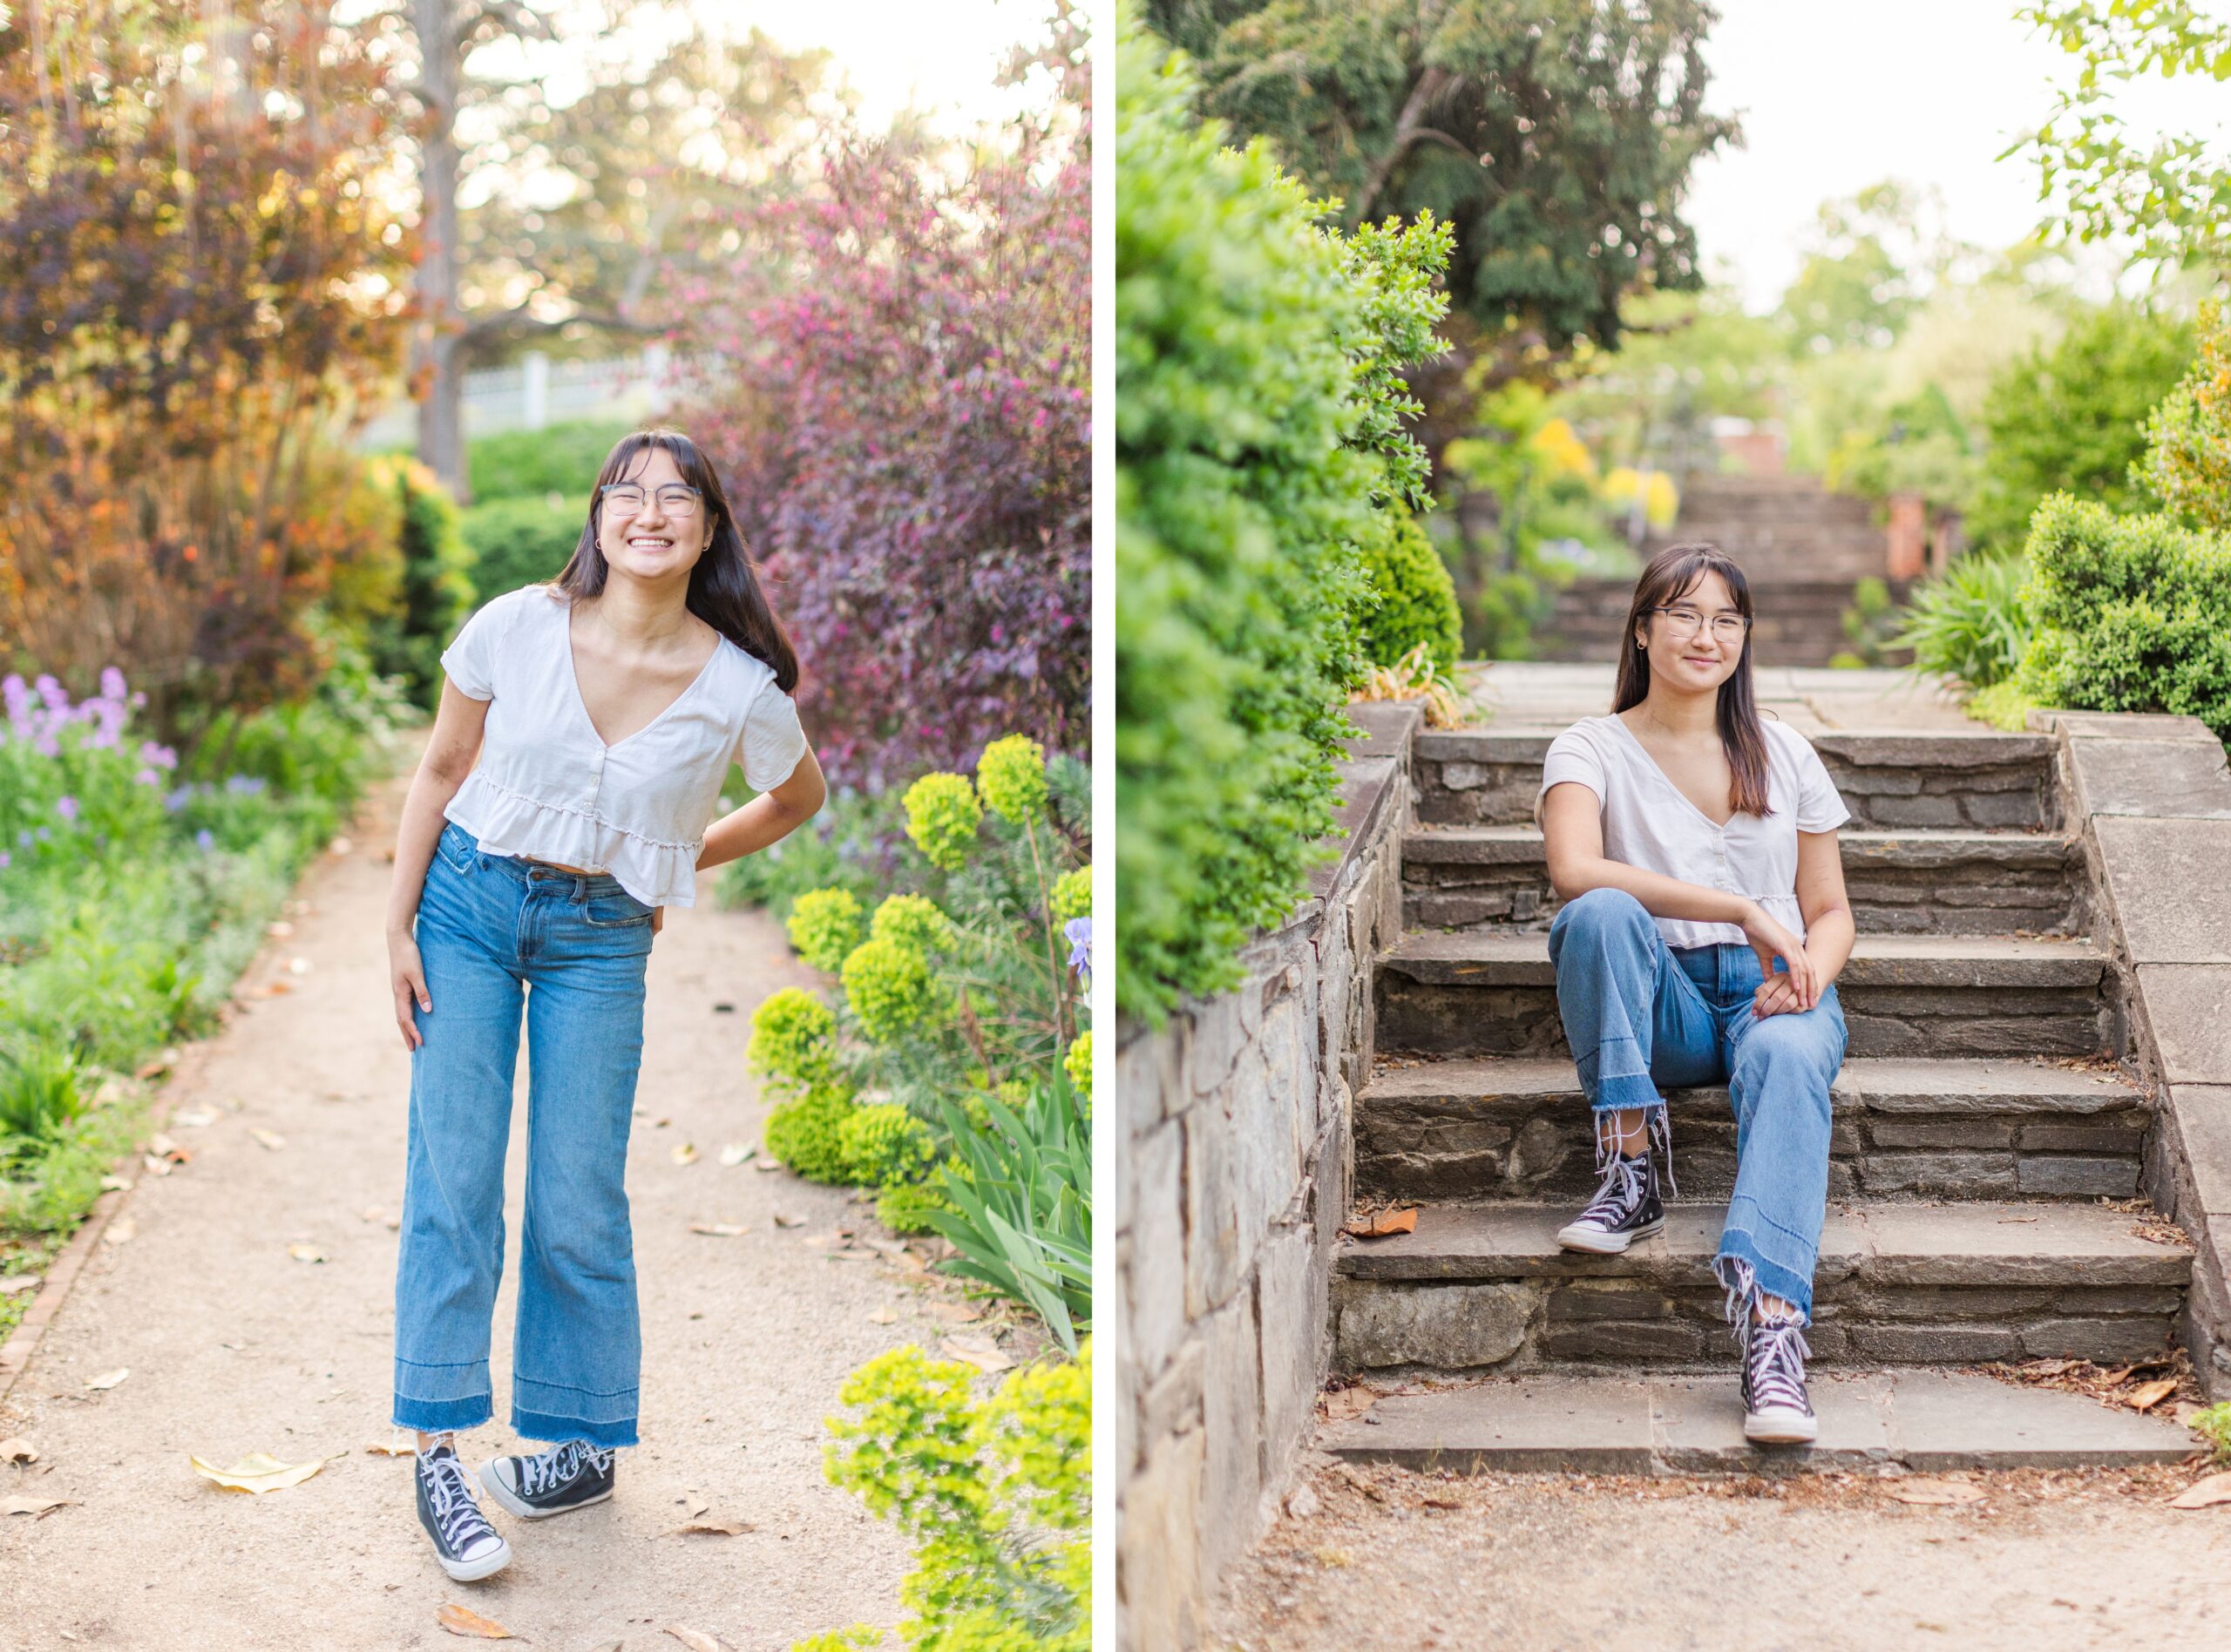 Amanda Coll Photography Senior Session at Silver Lake Regional Park Amanda Coll Photography Senior Session at Oatlands Historic House and Gardens